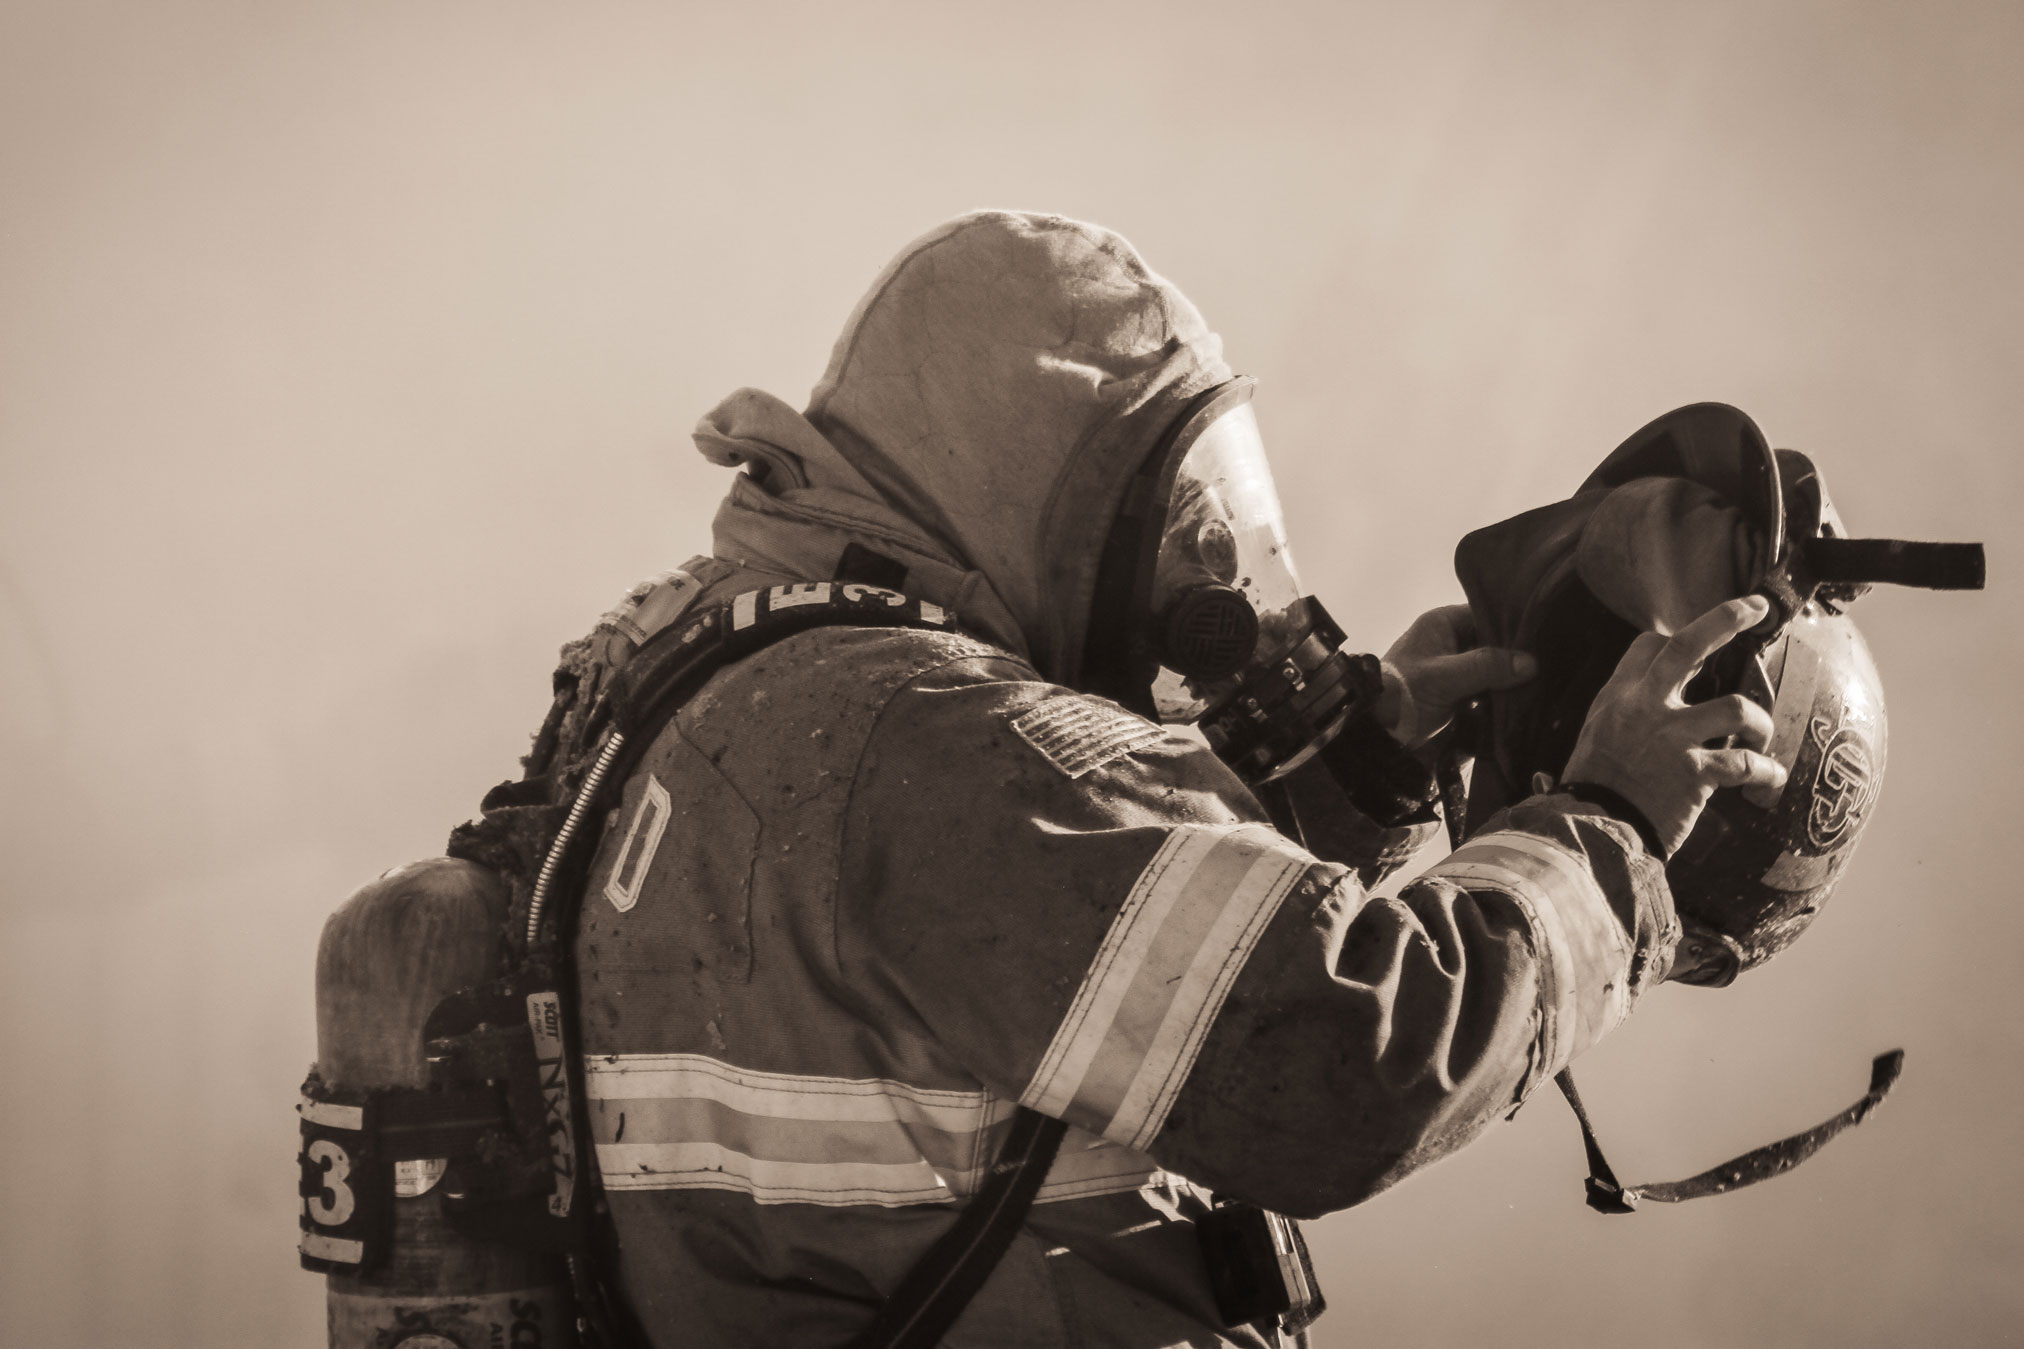 Featured image for “Firefighter Gears Up”